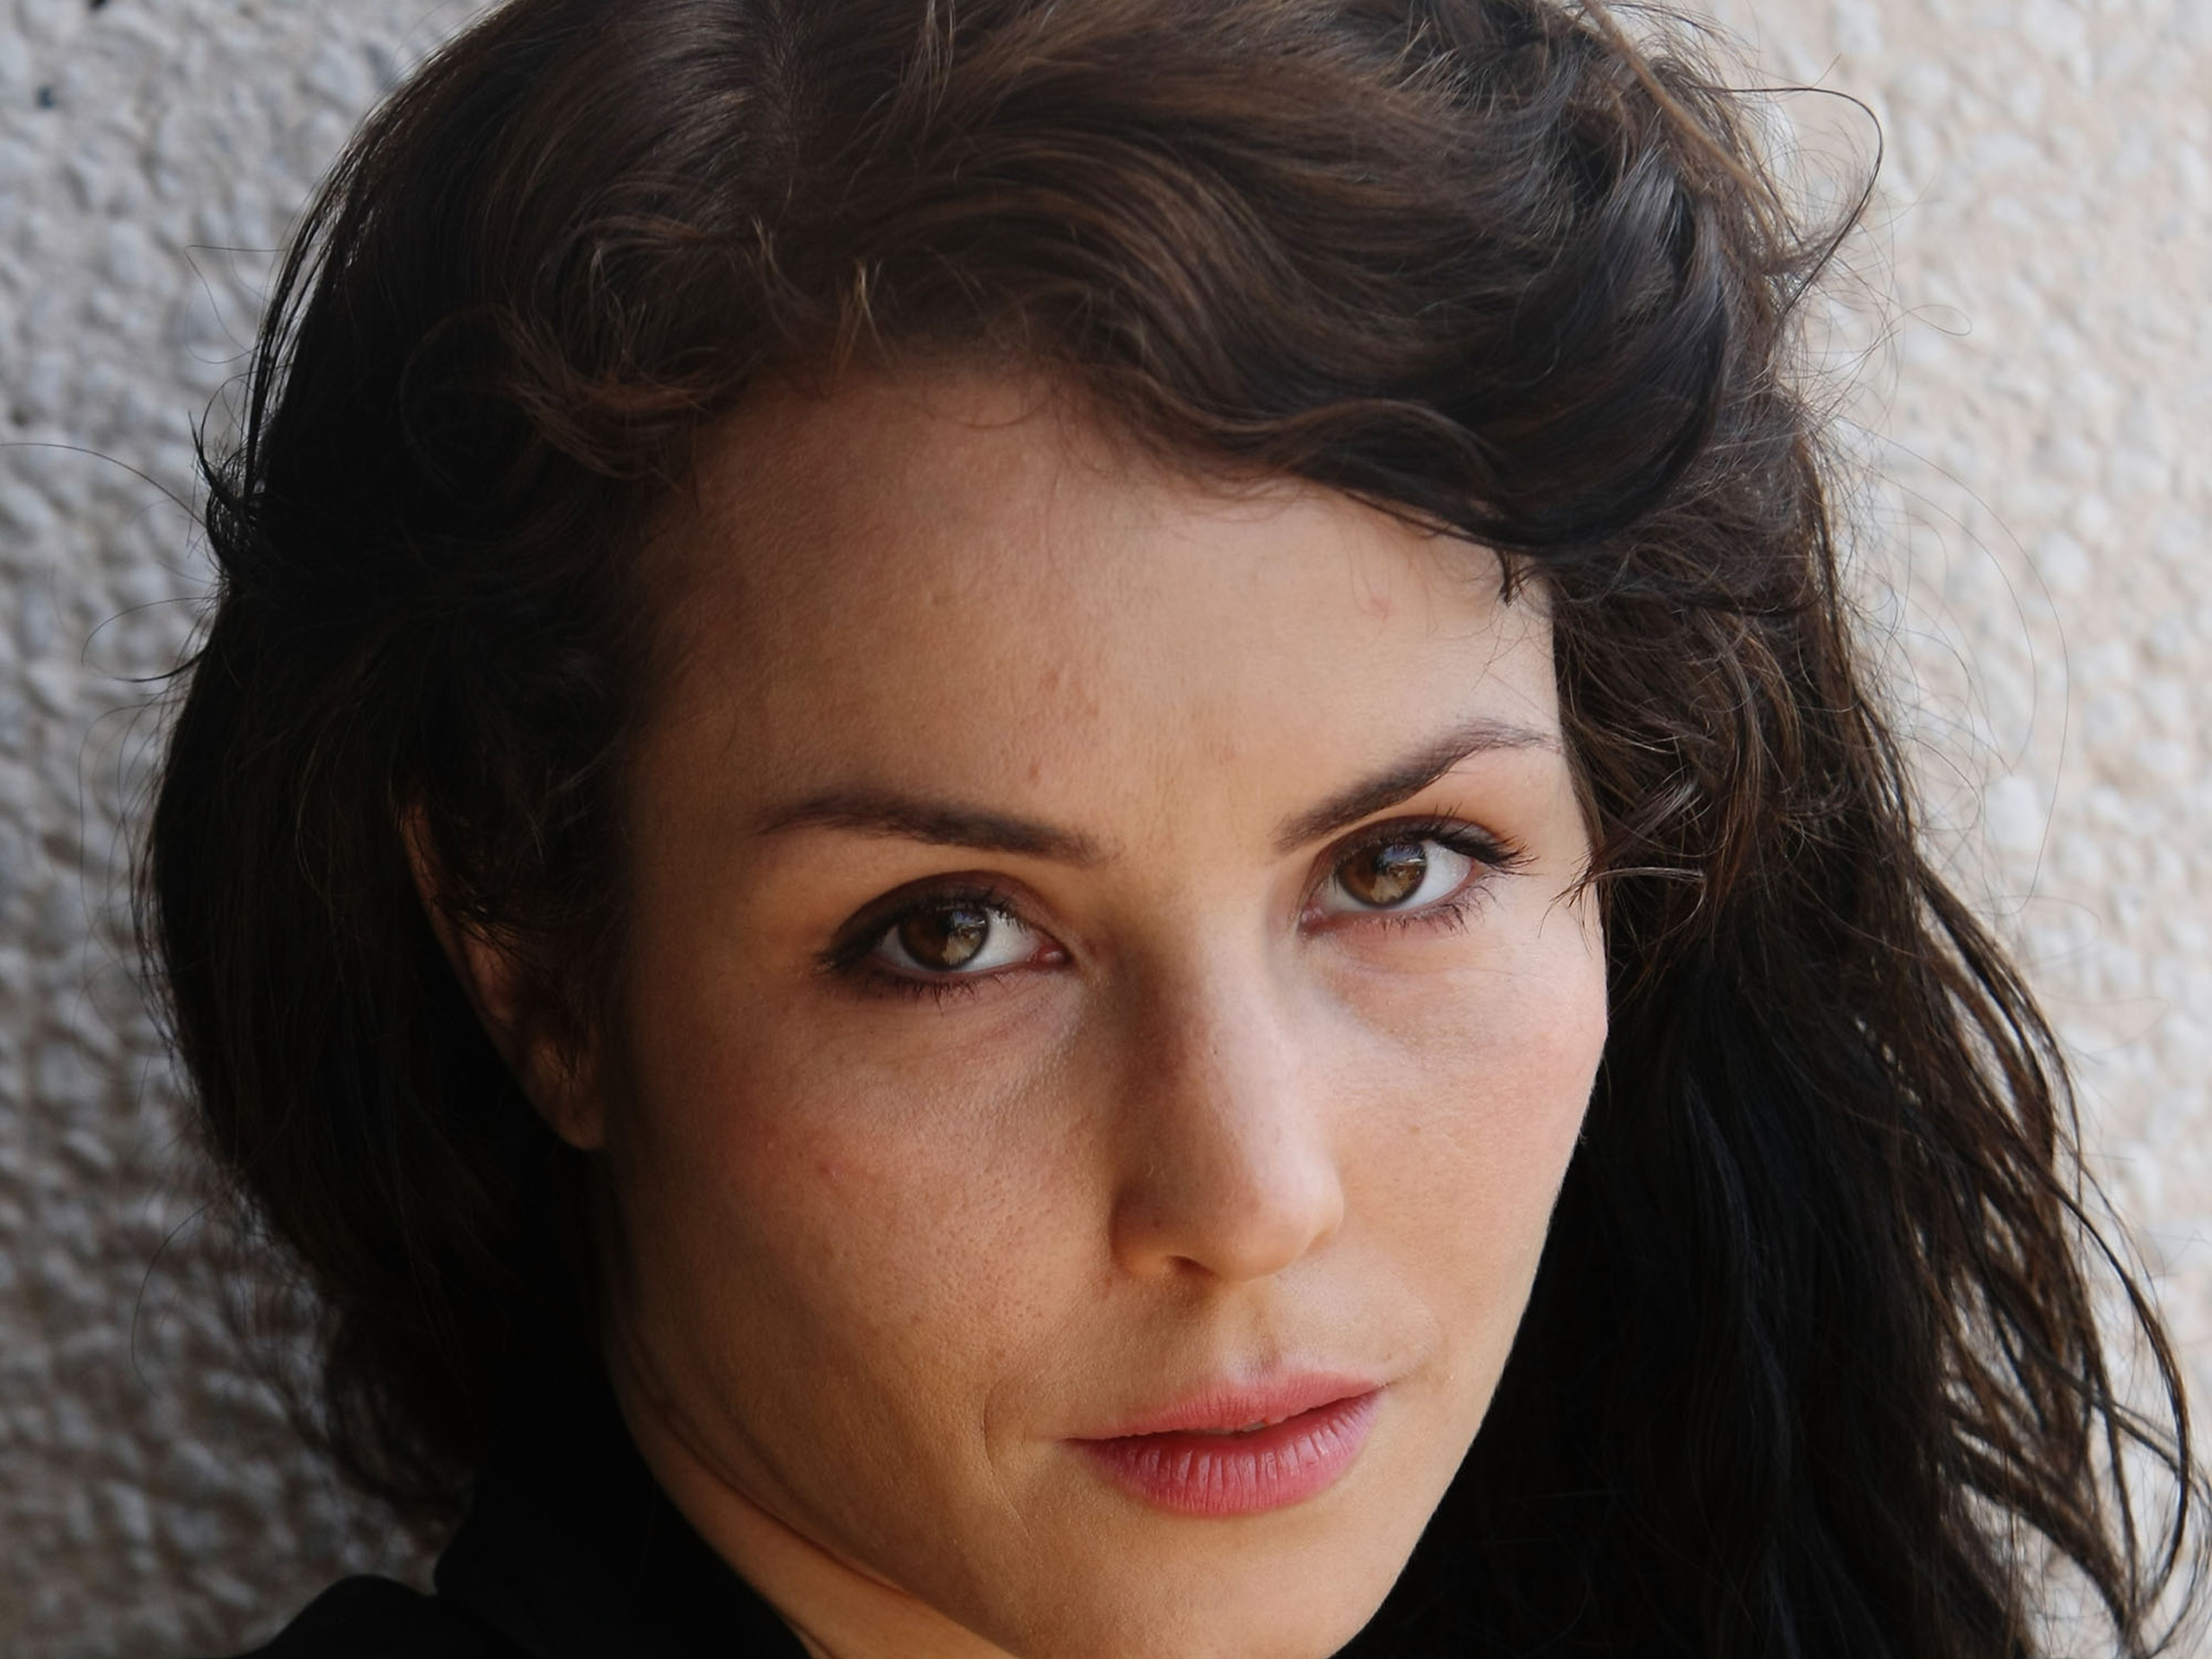 Noomi Rapace #9